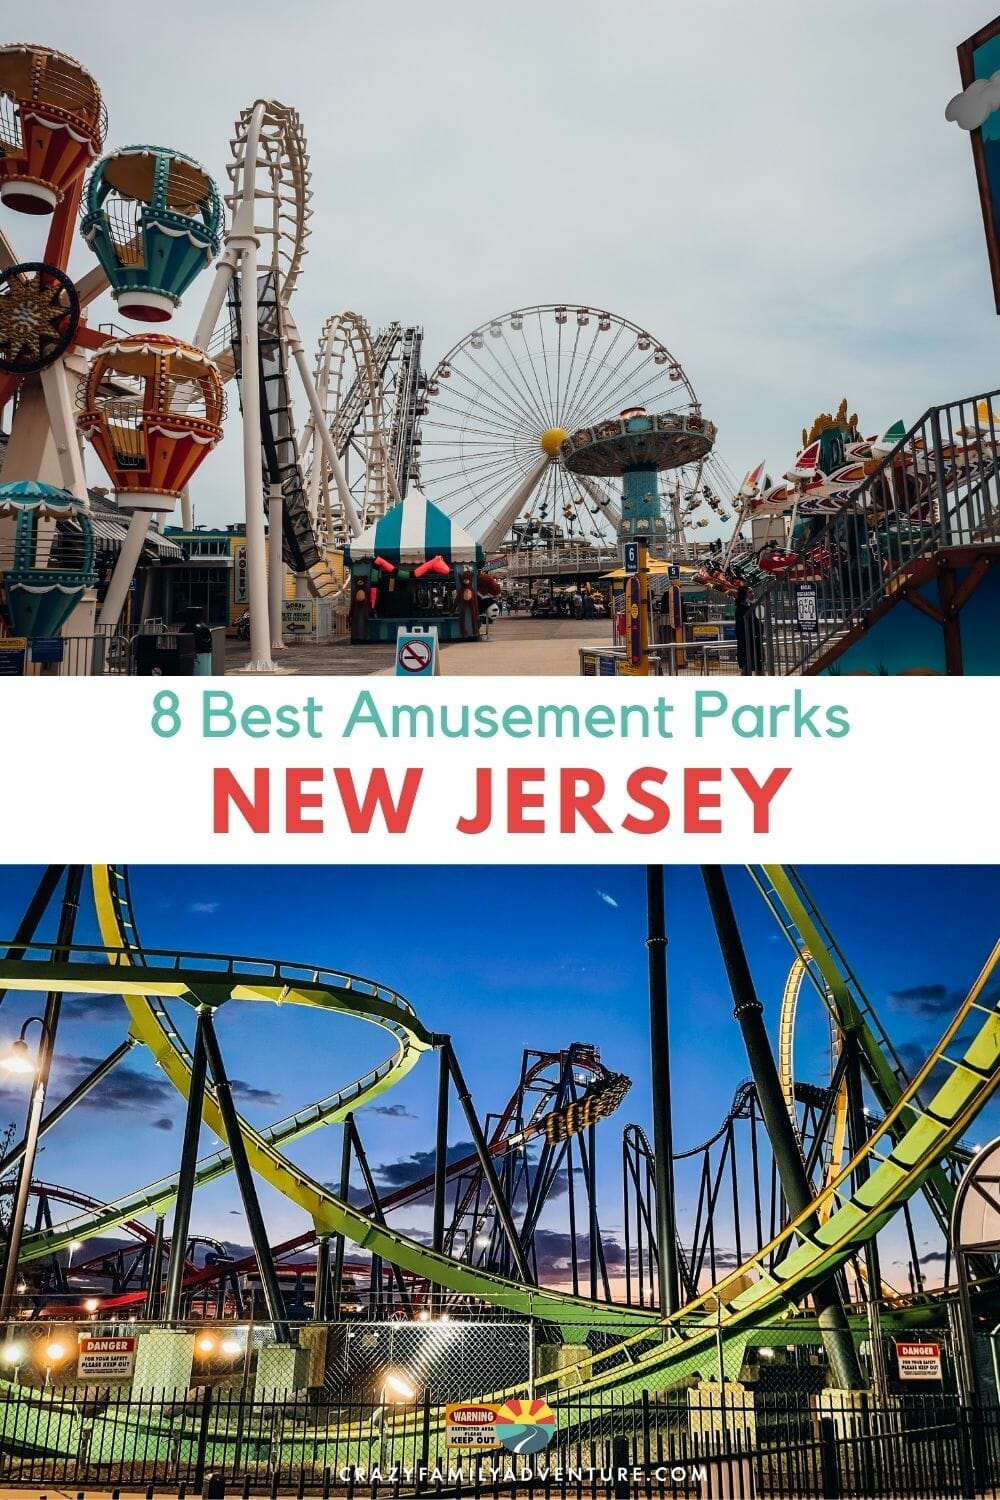 Check out our 8 best Amusement Parks In NJ. From ferris wheels to wave pools, tilt-a-whirls to arcade games, laser tag to ice cream!